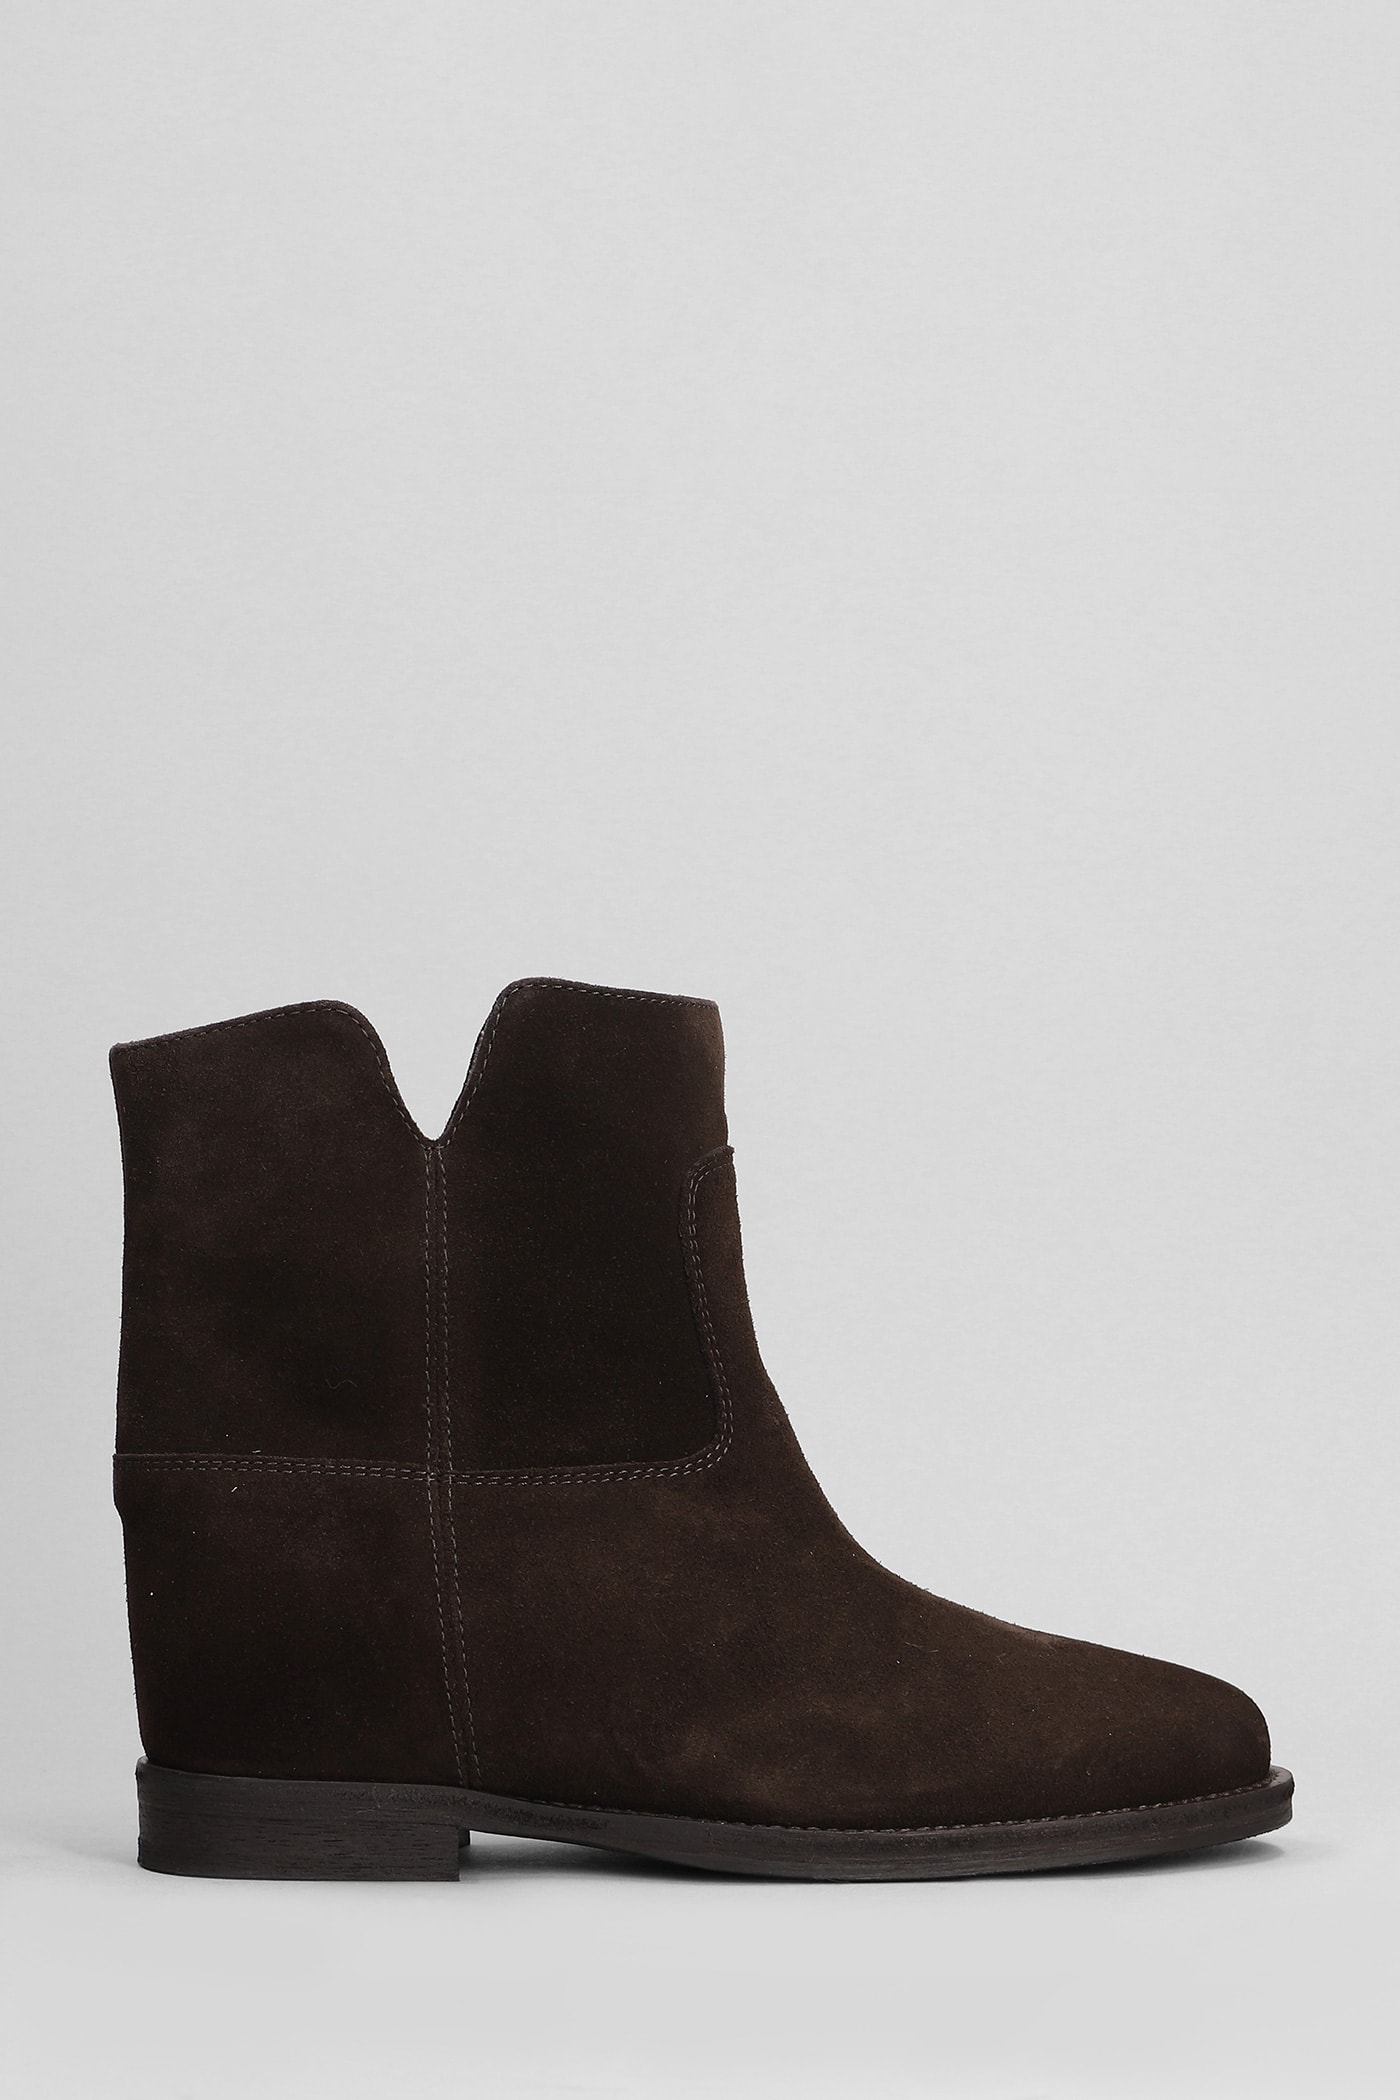 Ankle Boots Inside Wedge In Dark Brown Suede